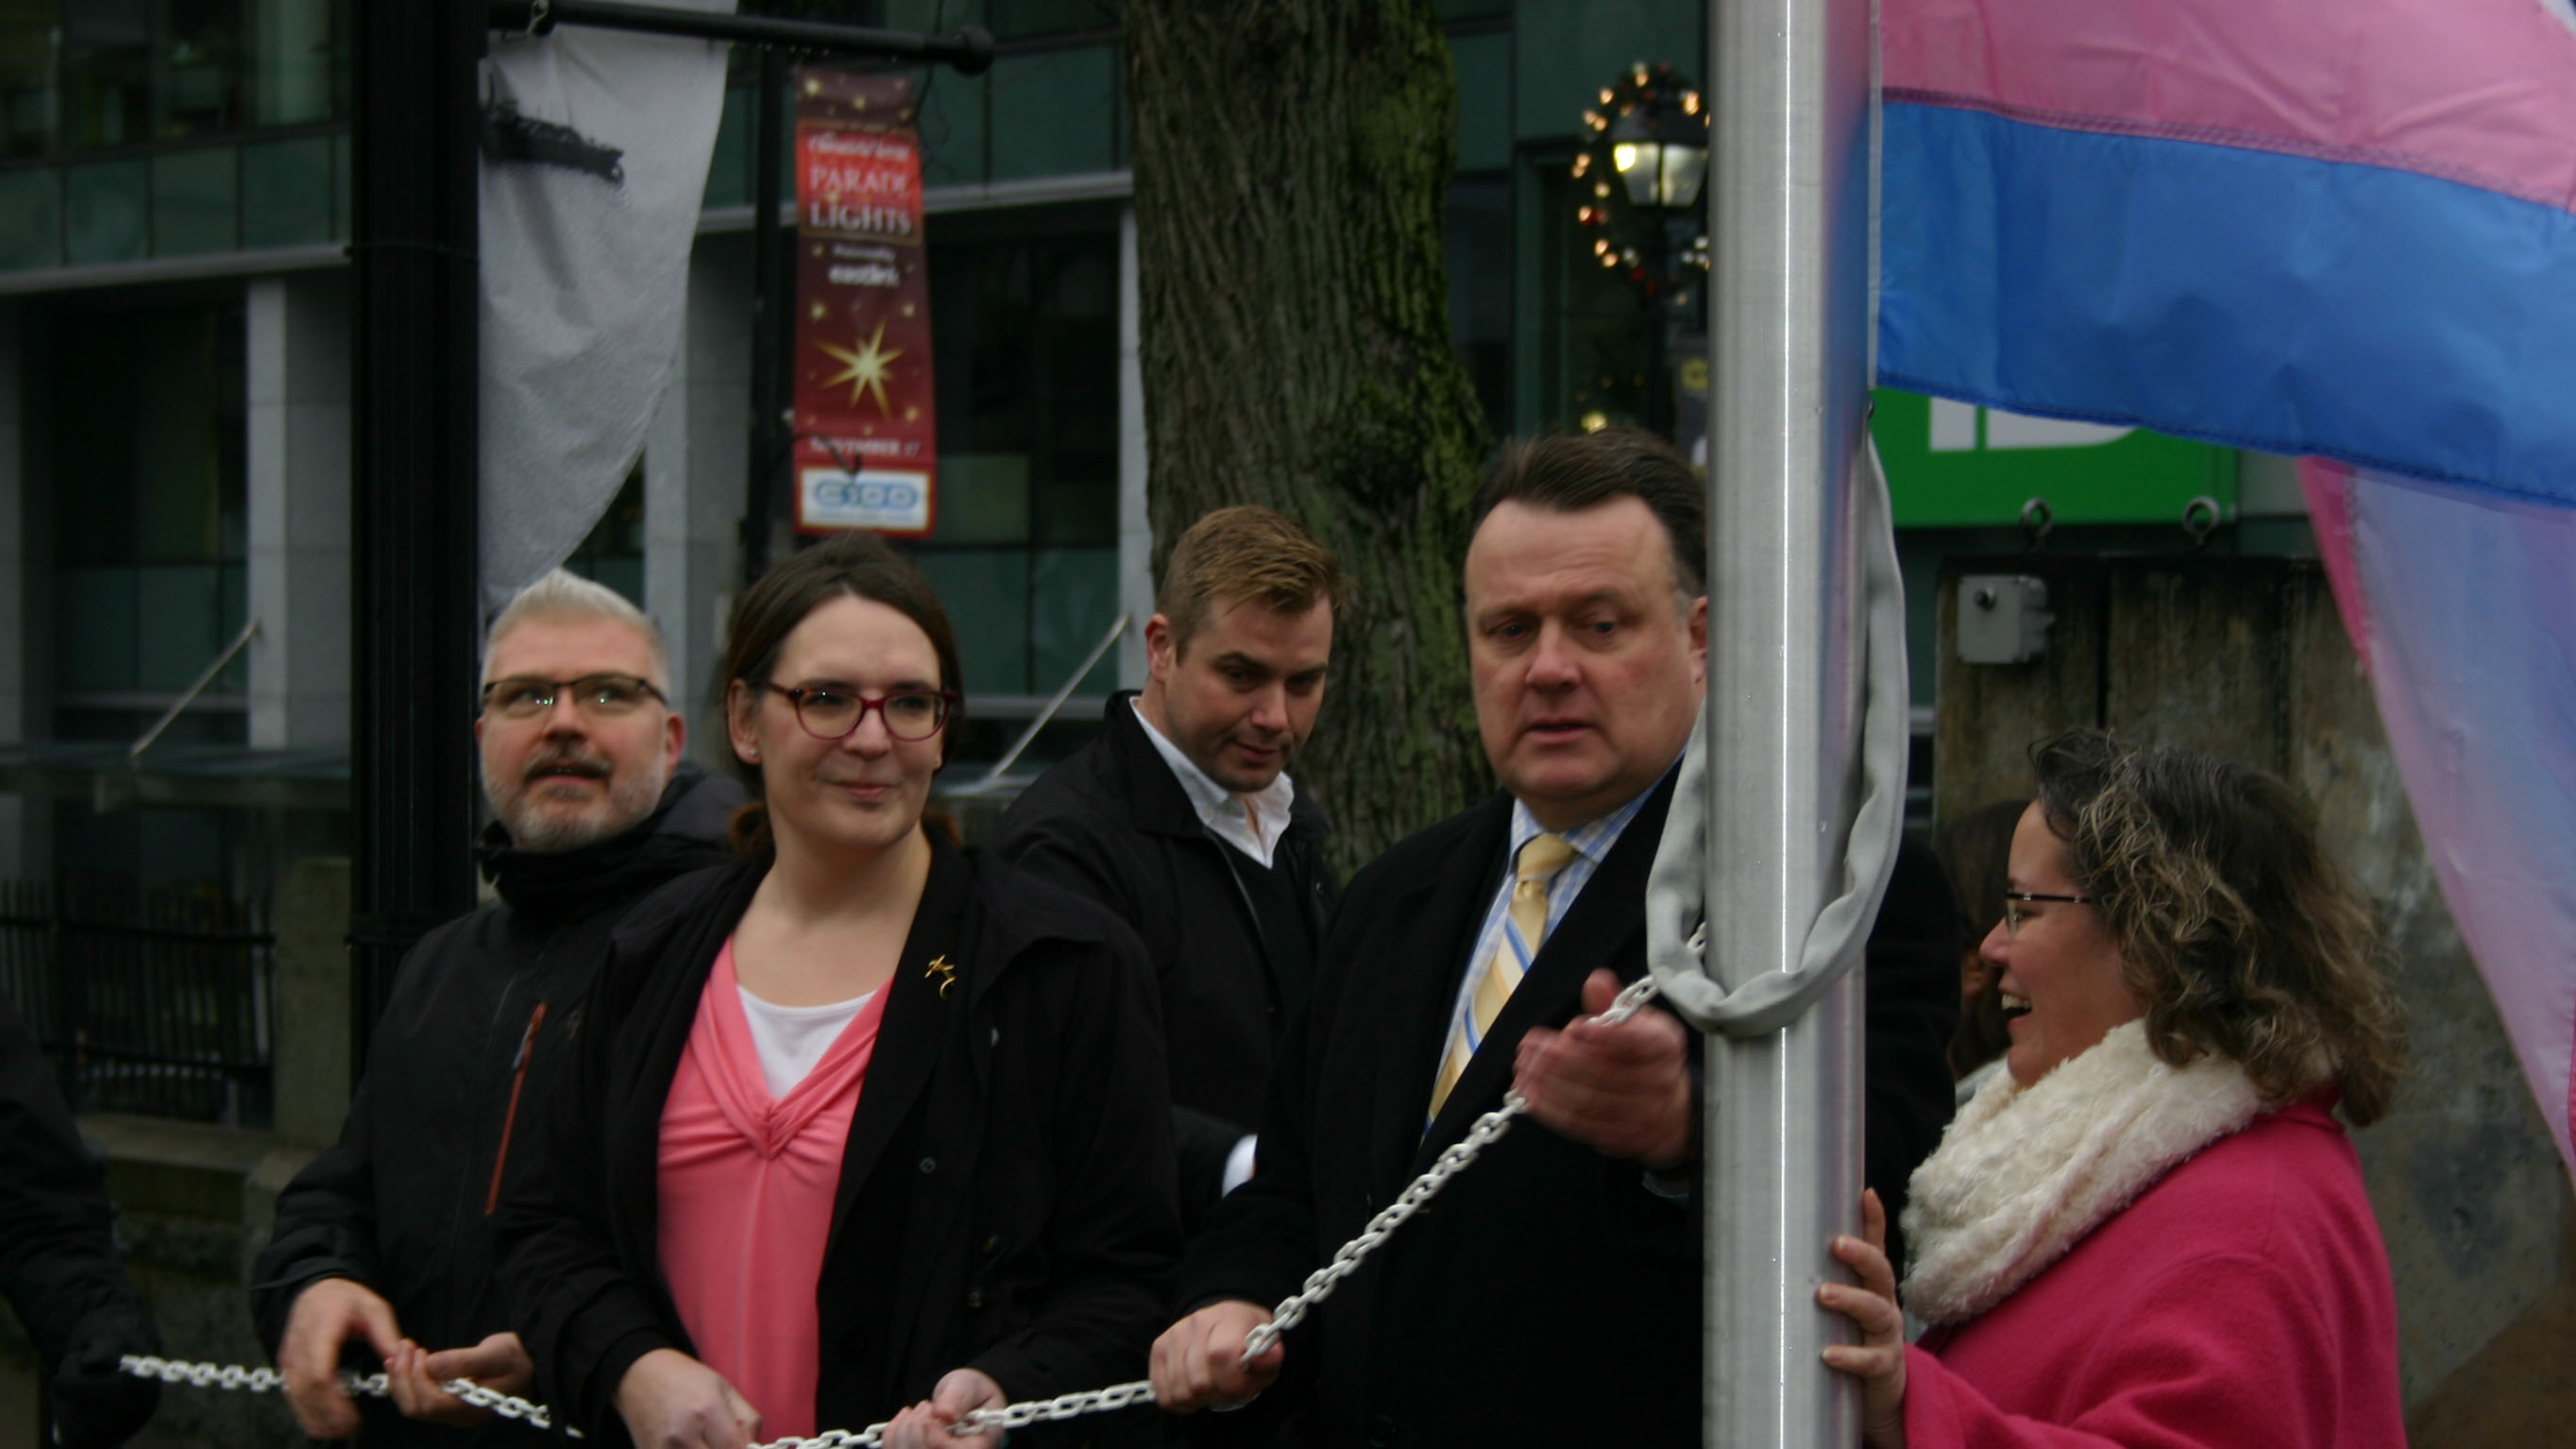 Shawn Cleary, Jessica Dempsey, and Mayor Mike Savage raise the transgender flag outside of Halifax City Hall on Tuesday. Nov. 20 is Trans Day of Remembrance.